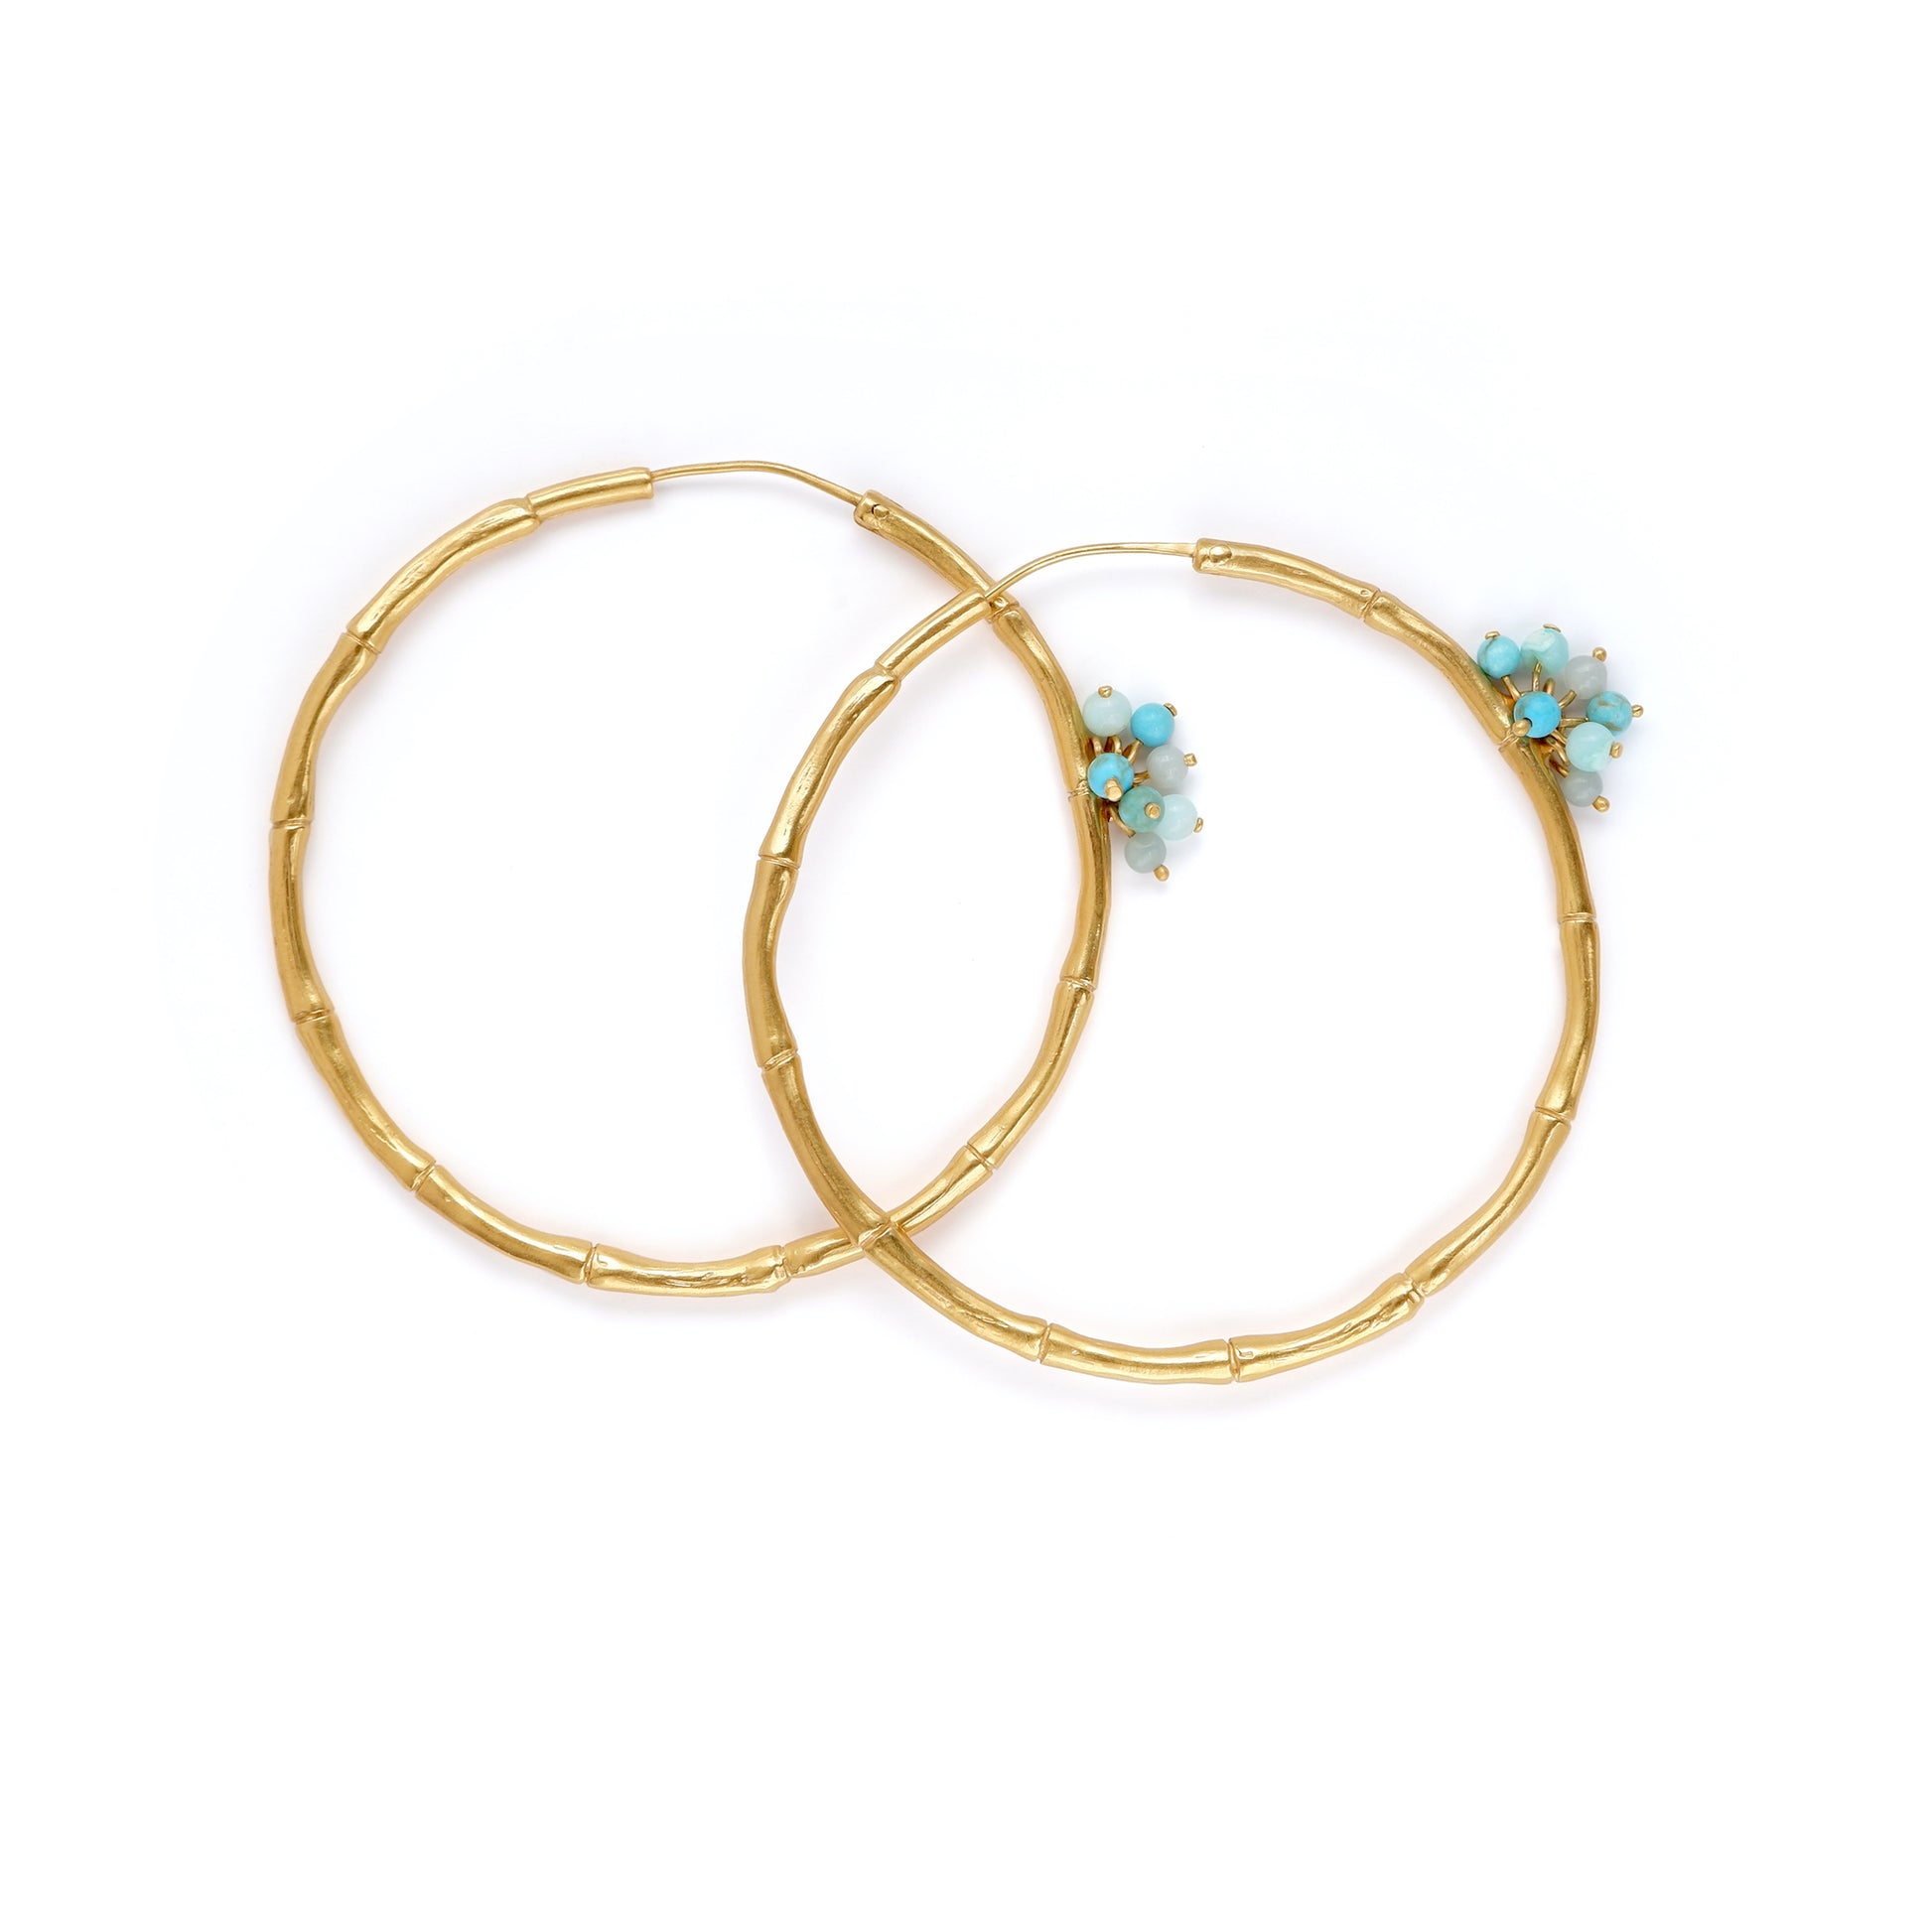 Gold Vermeil Bamboo Hoops large size, blue, turquoise gemstone Bauble beads